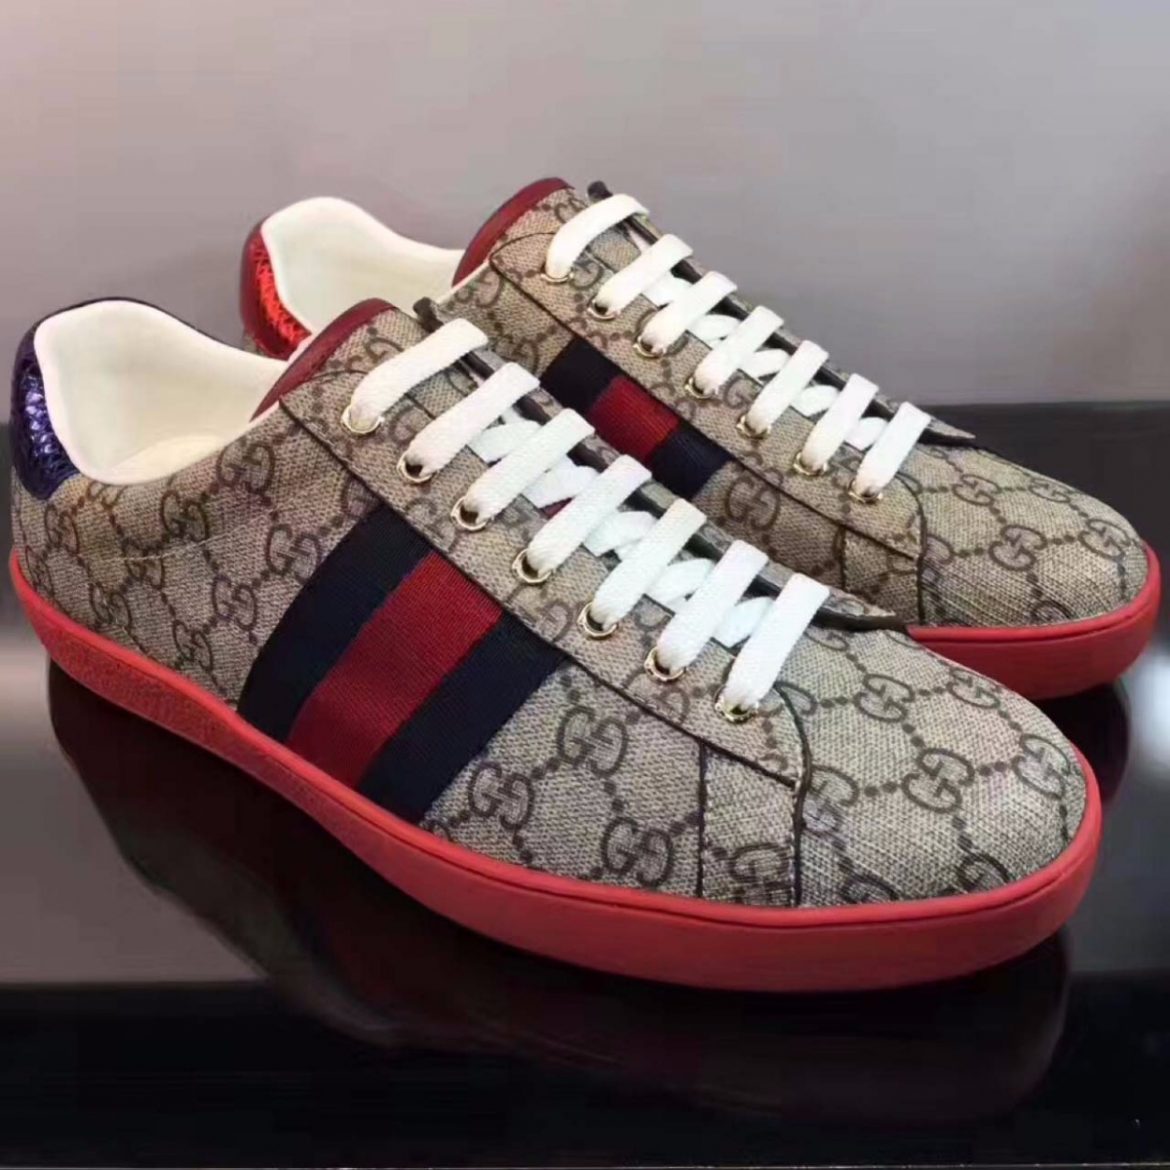 Gucci Men Ace GG Supreme Canvas Sneaker Shoes-Red - LULUX